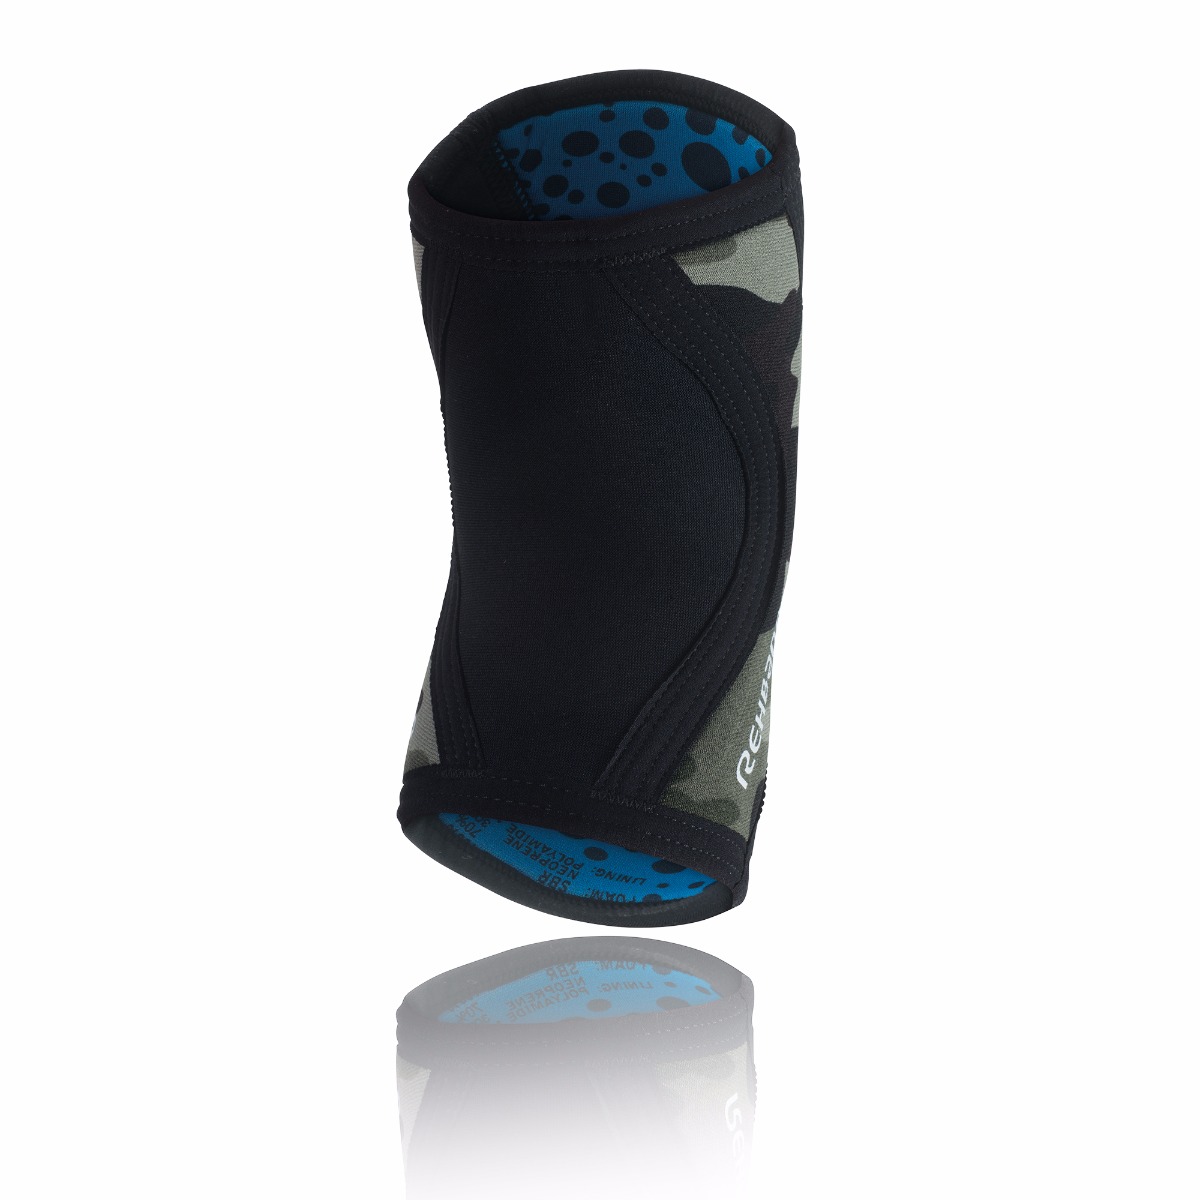 Rehband Rx Elbow Support